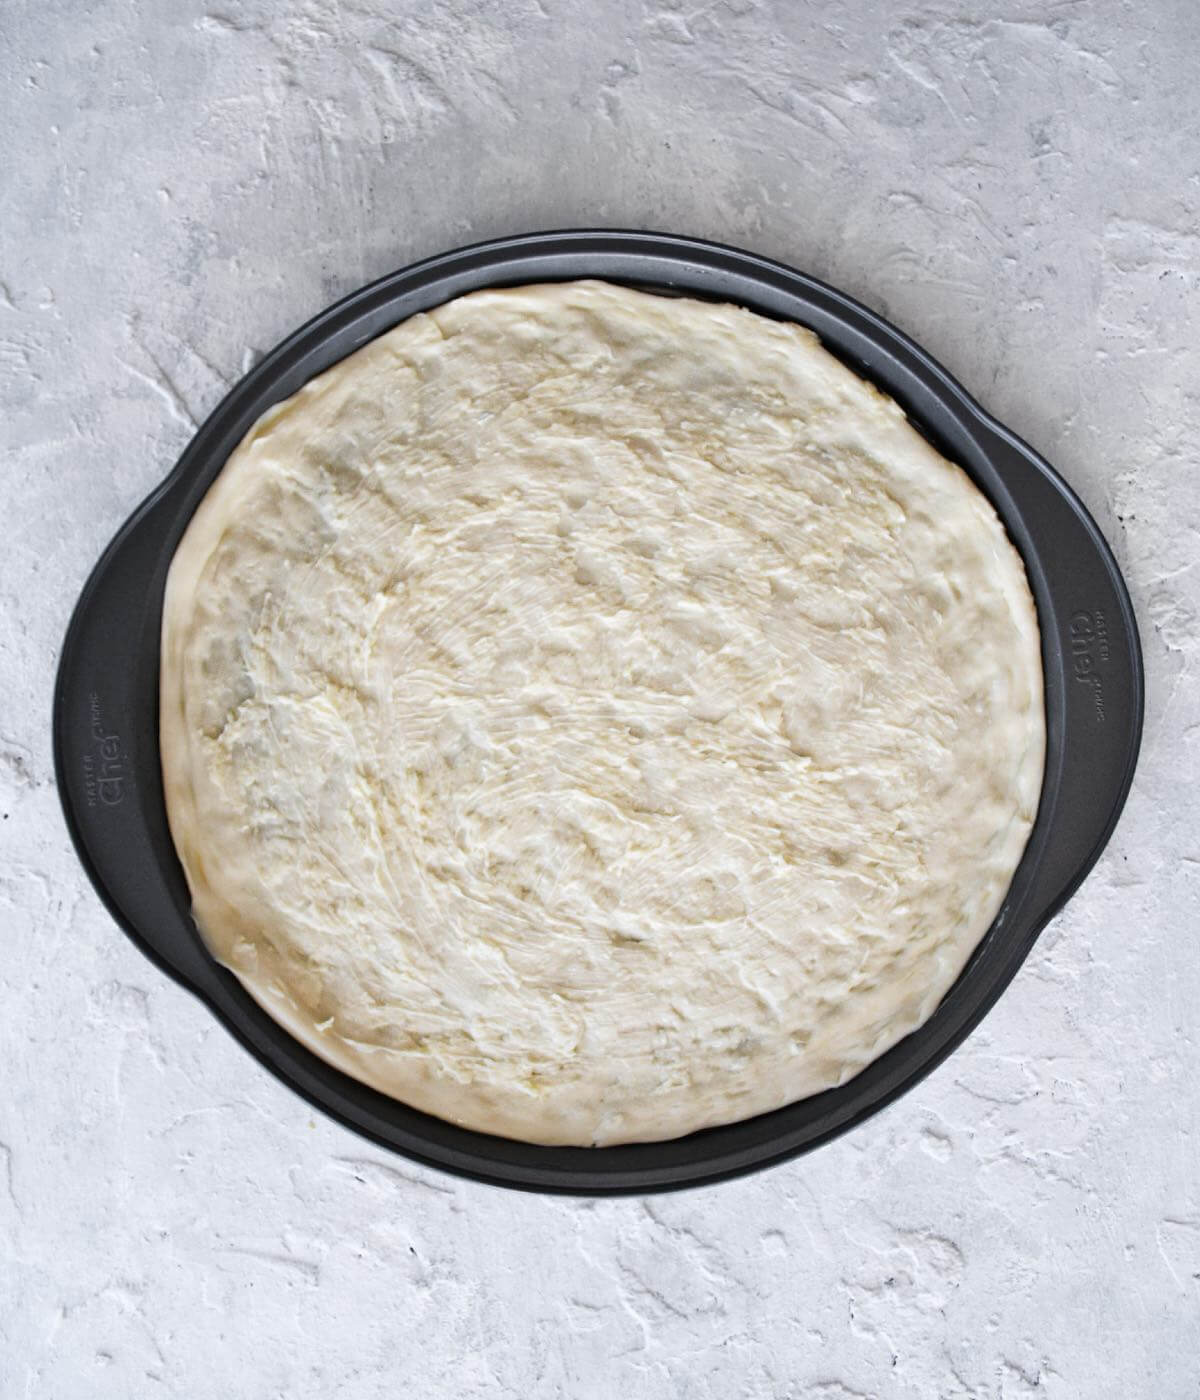 homemade pizza dough stretched out in a 12" pizza pan.